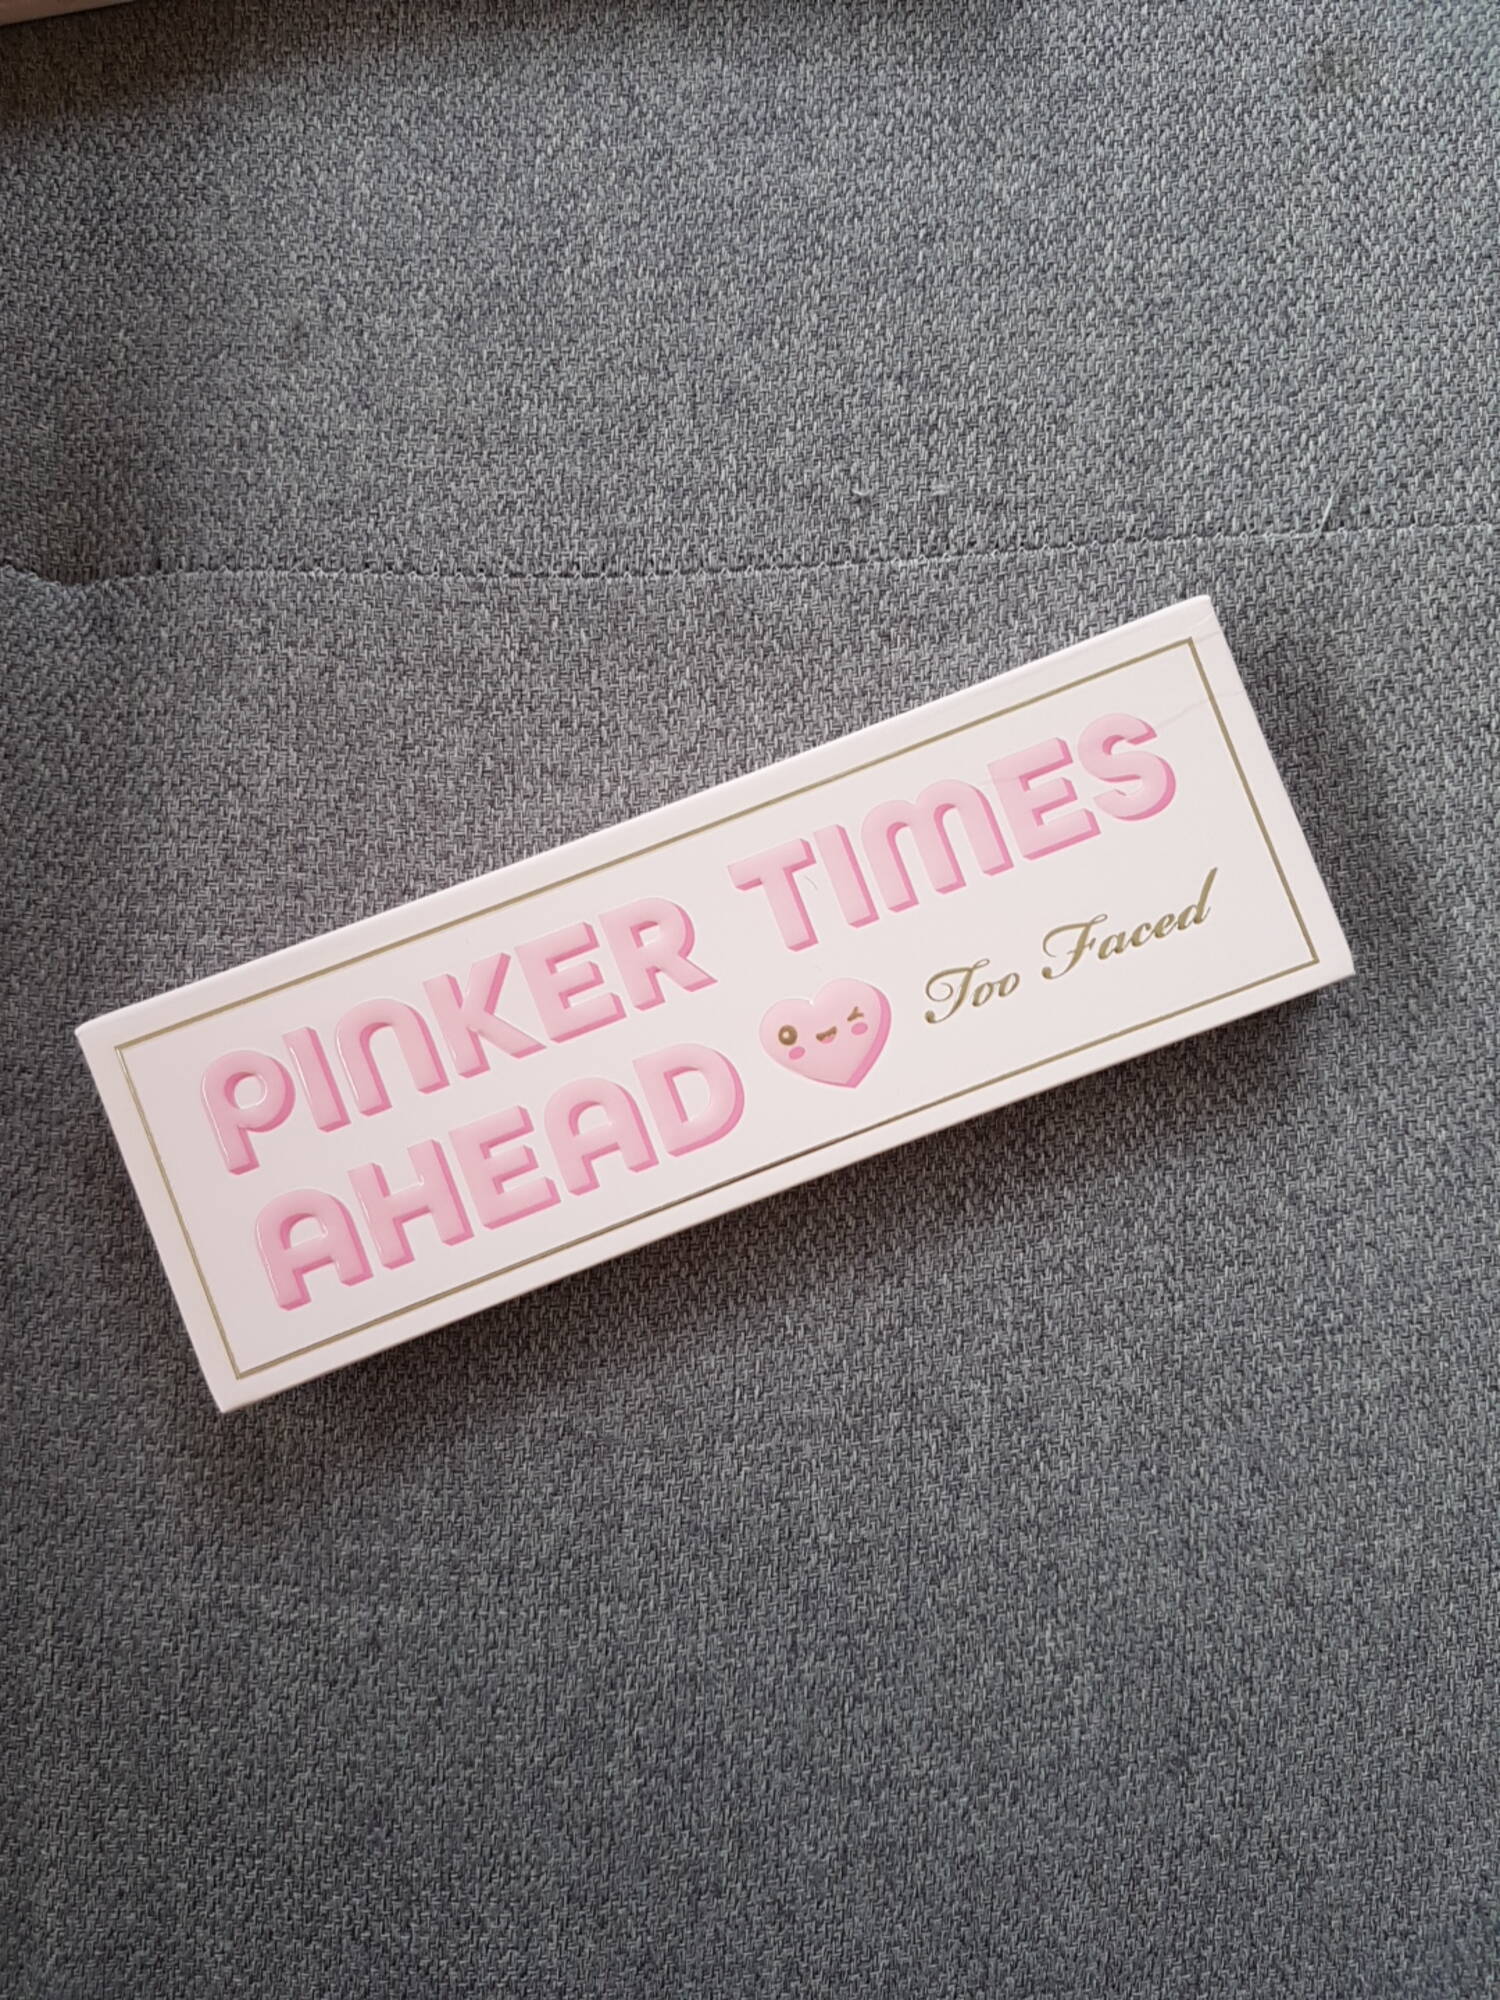 TOO FACED - Pinker times ahead